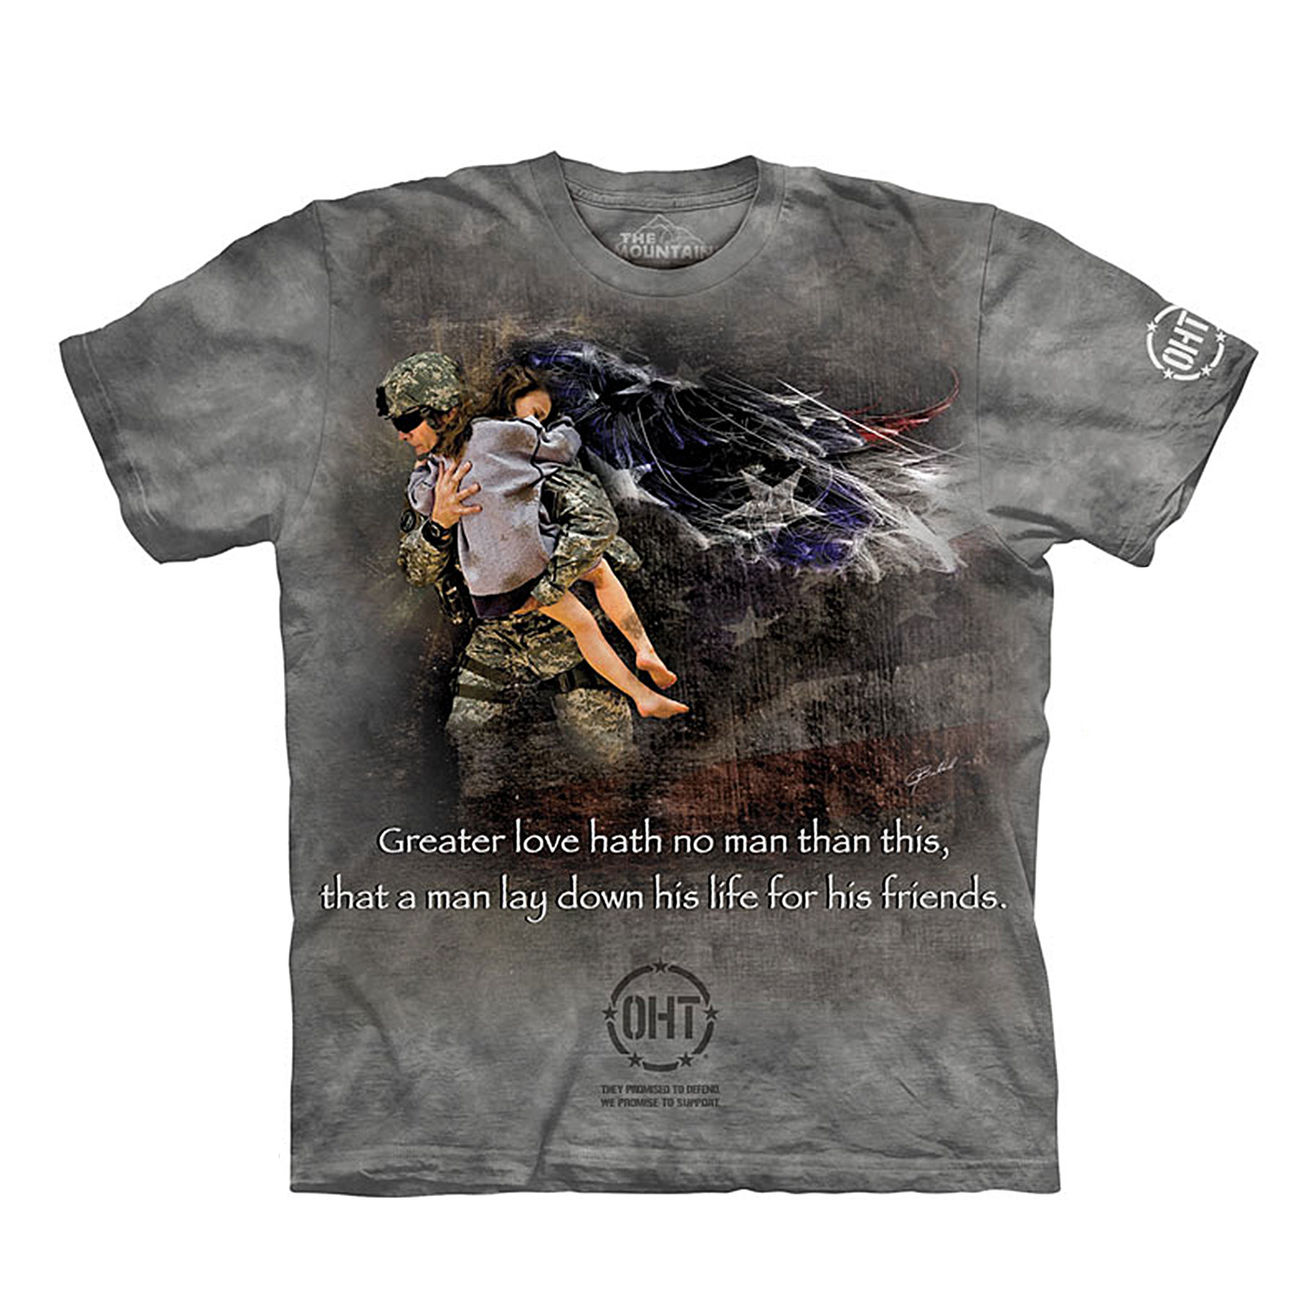 The Mountain T-Shirt Heroic Soldier Oht-Hero